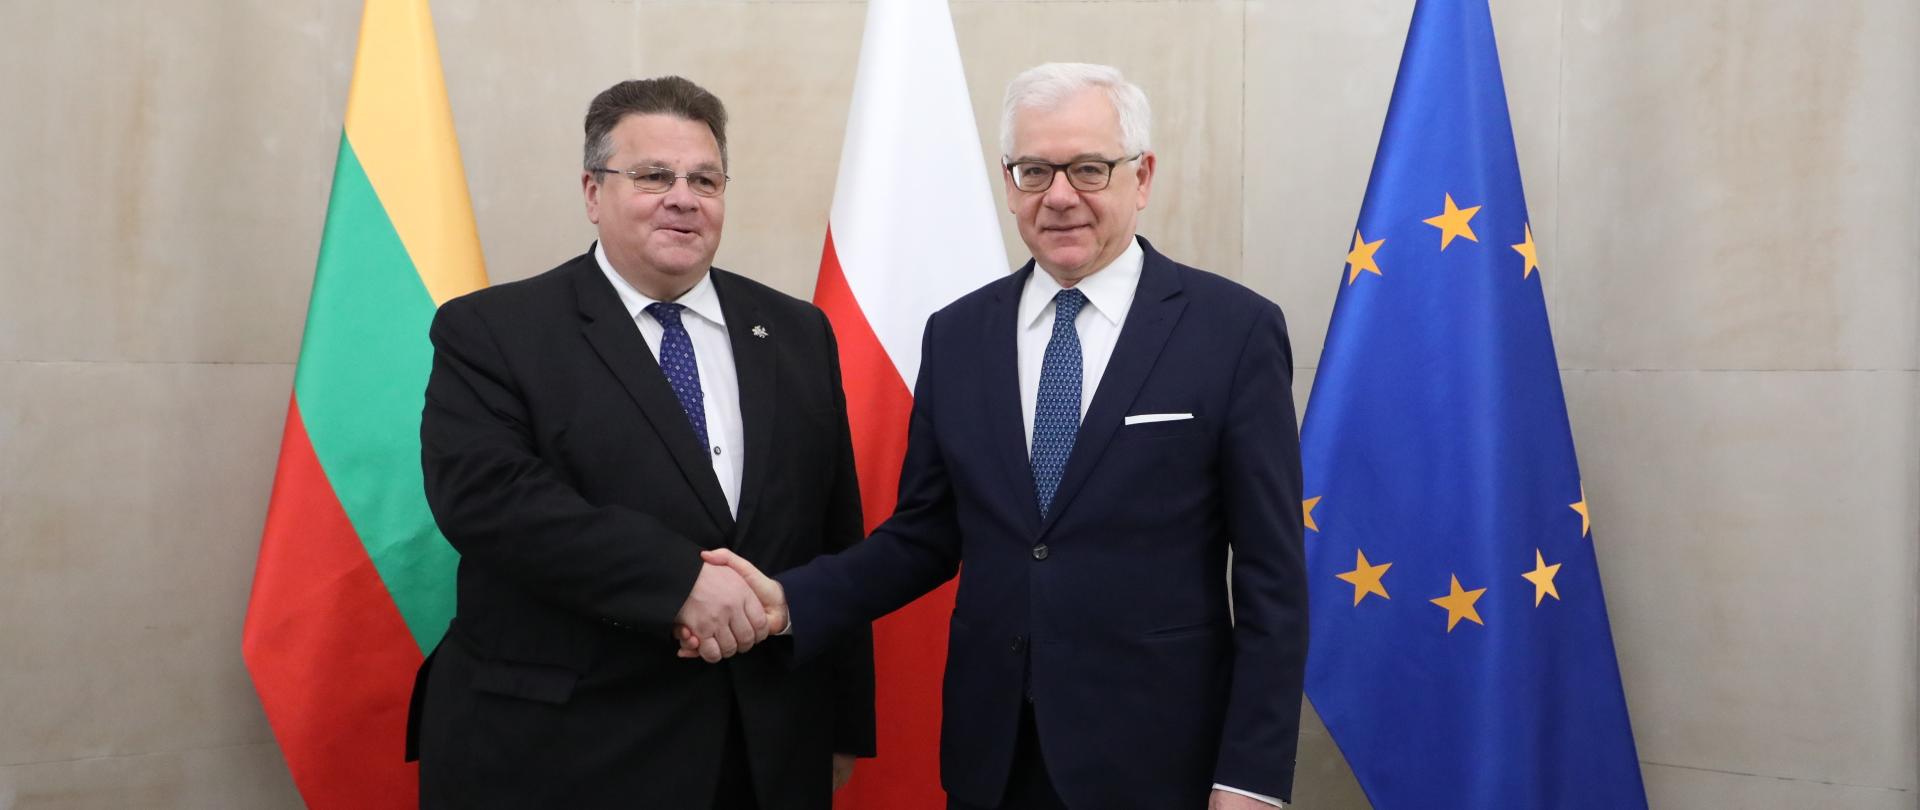 Lithuania’s foreign minister visits Poland